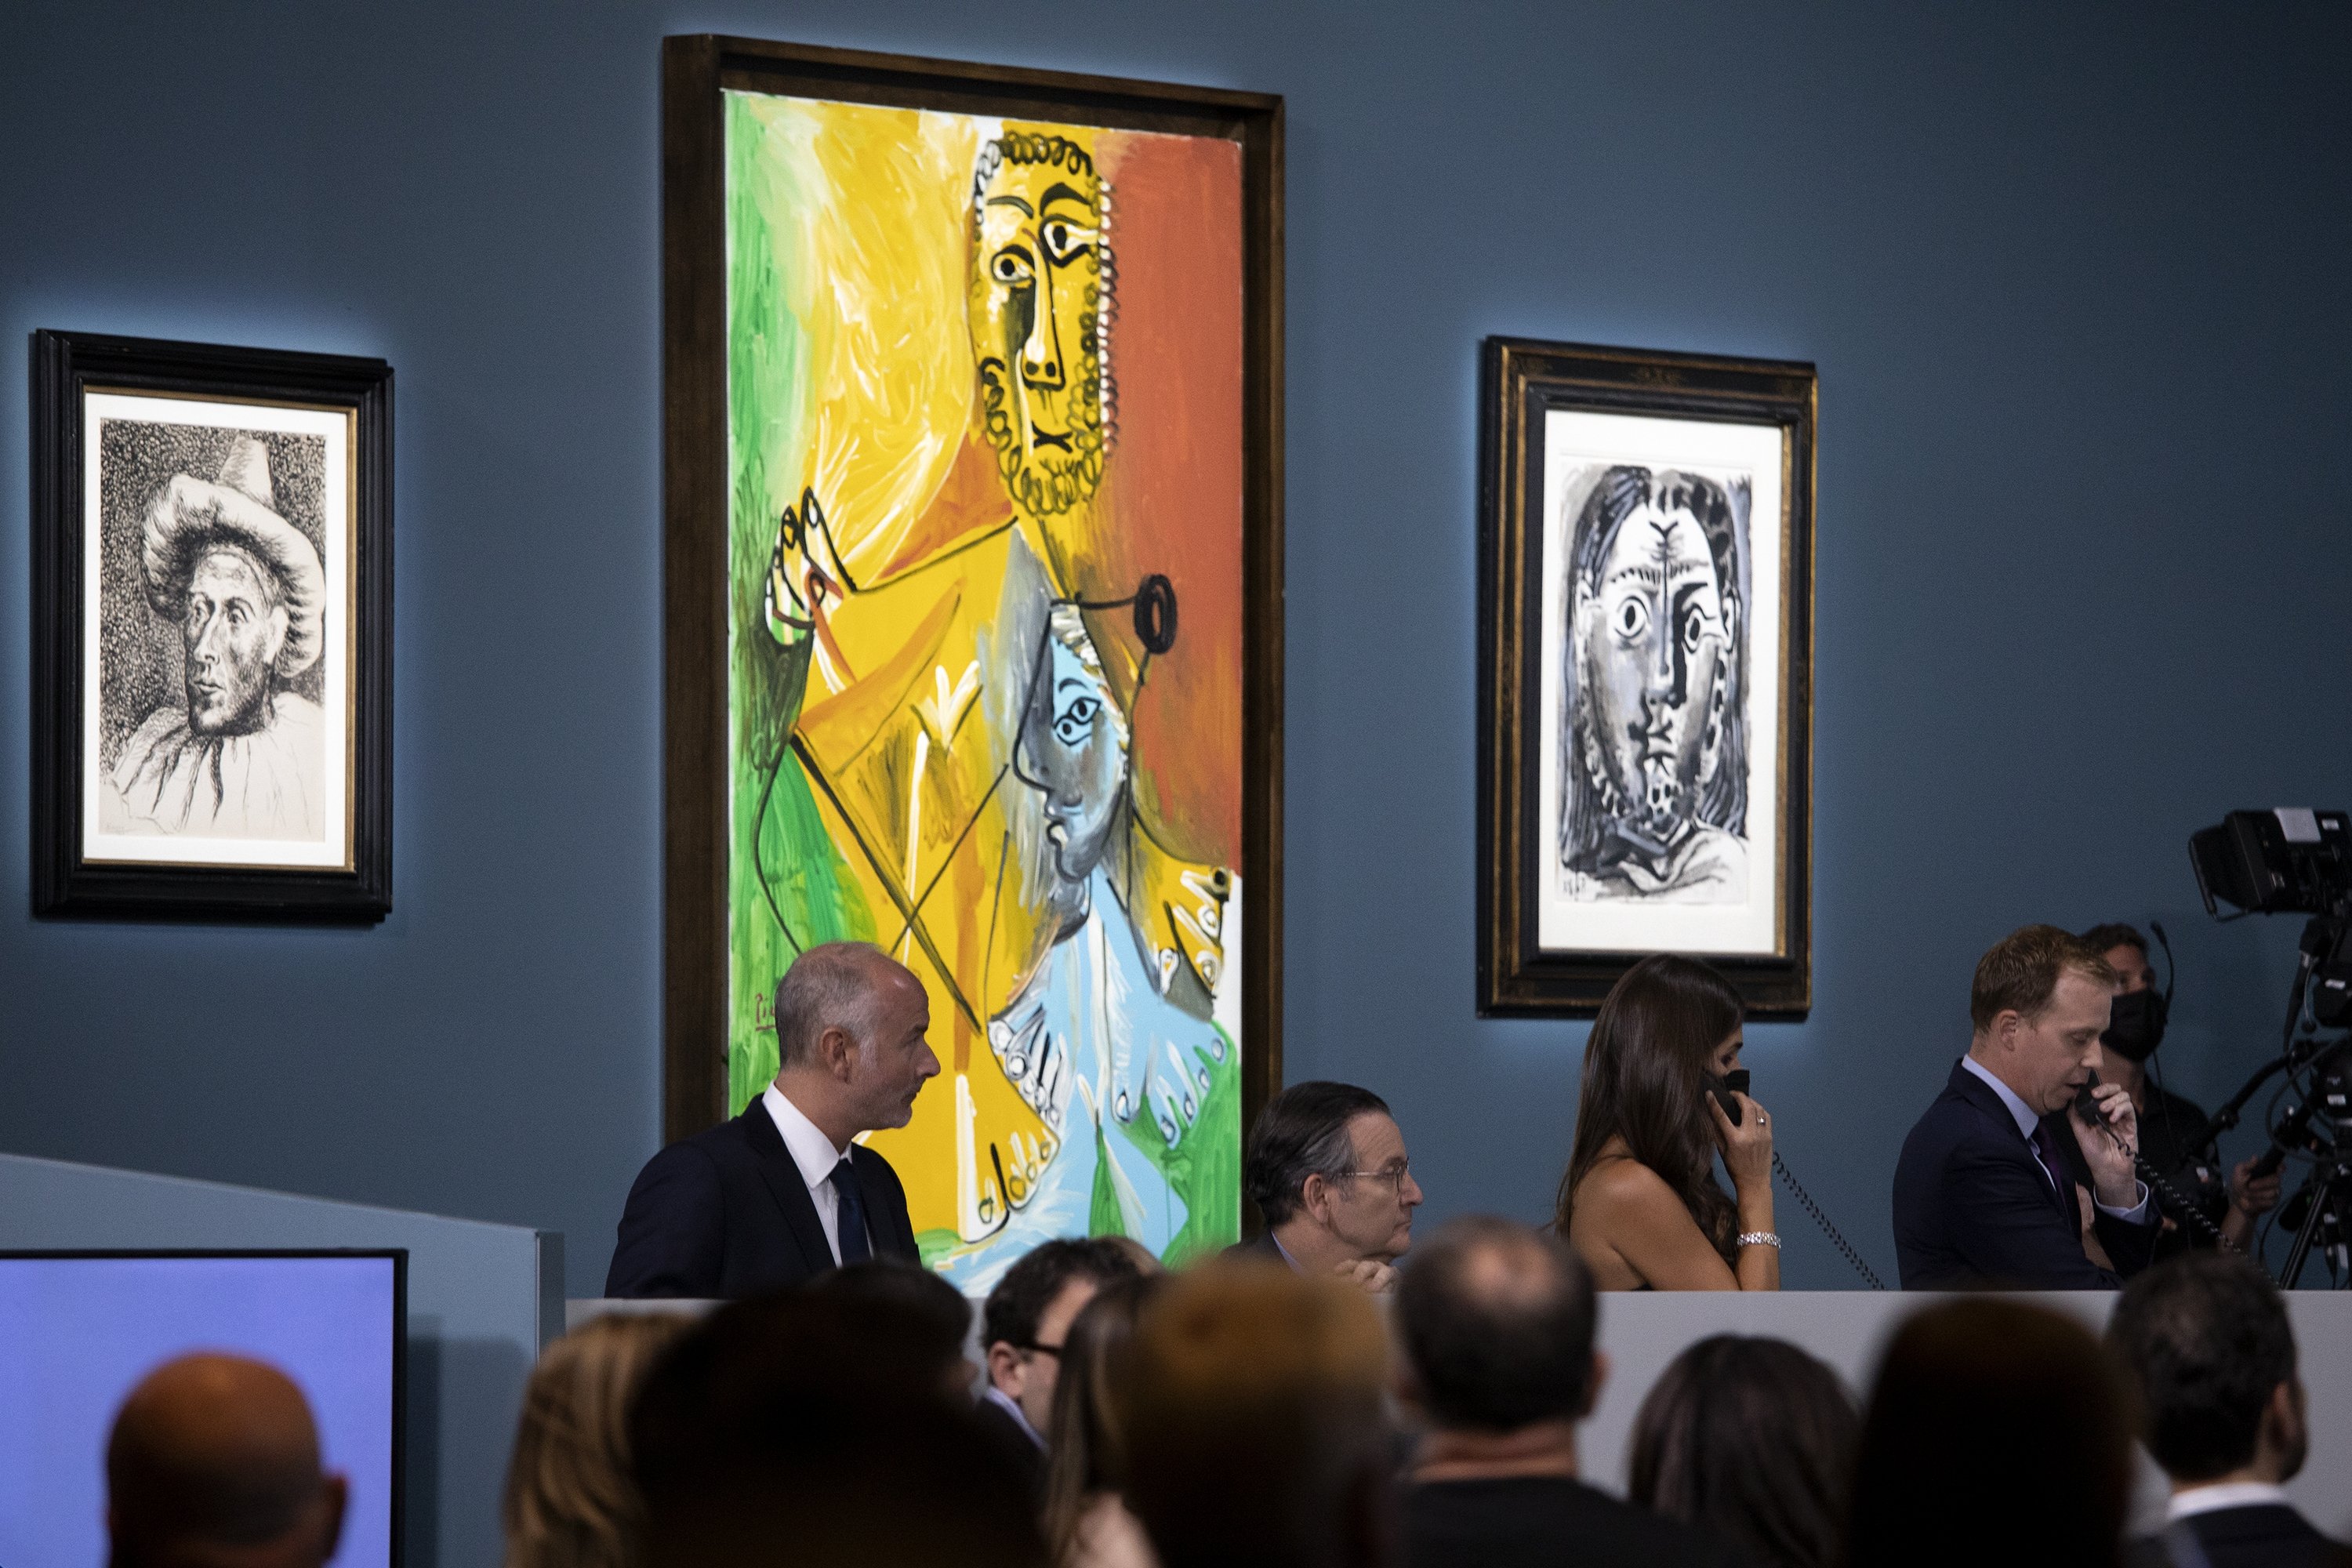 Buyers and attendees mingle during an auction of Pablo Picasso